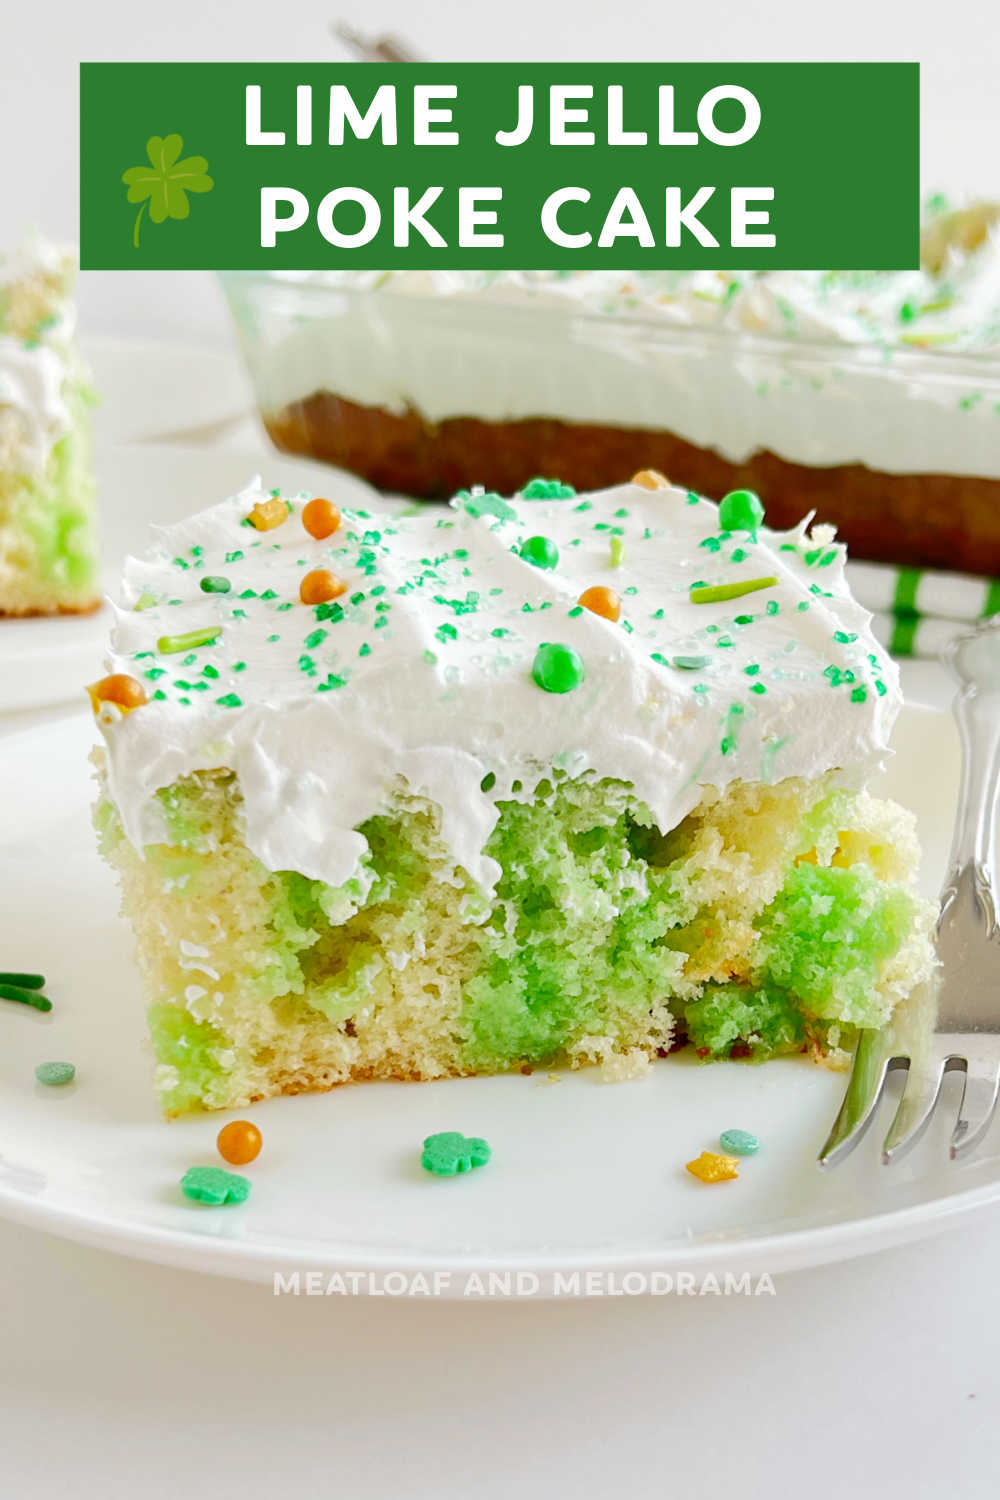 Lime Jello Poke Cake is a super easy delicious cake that is light, fluffy and the perfect dessert for St. Patrick's Day. This simple cake recipe is a real crowd pleaser, perfect for potlucks or any special occasion. via @meamel